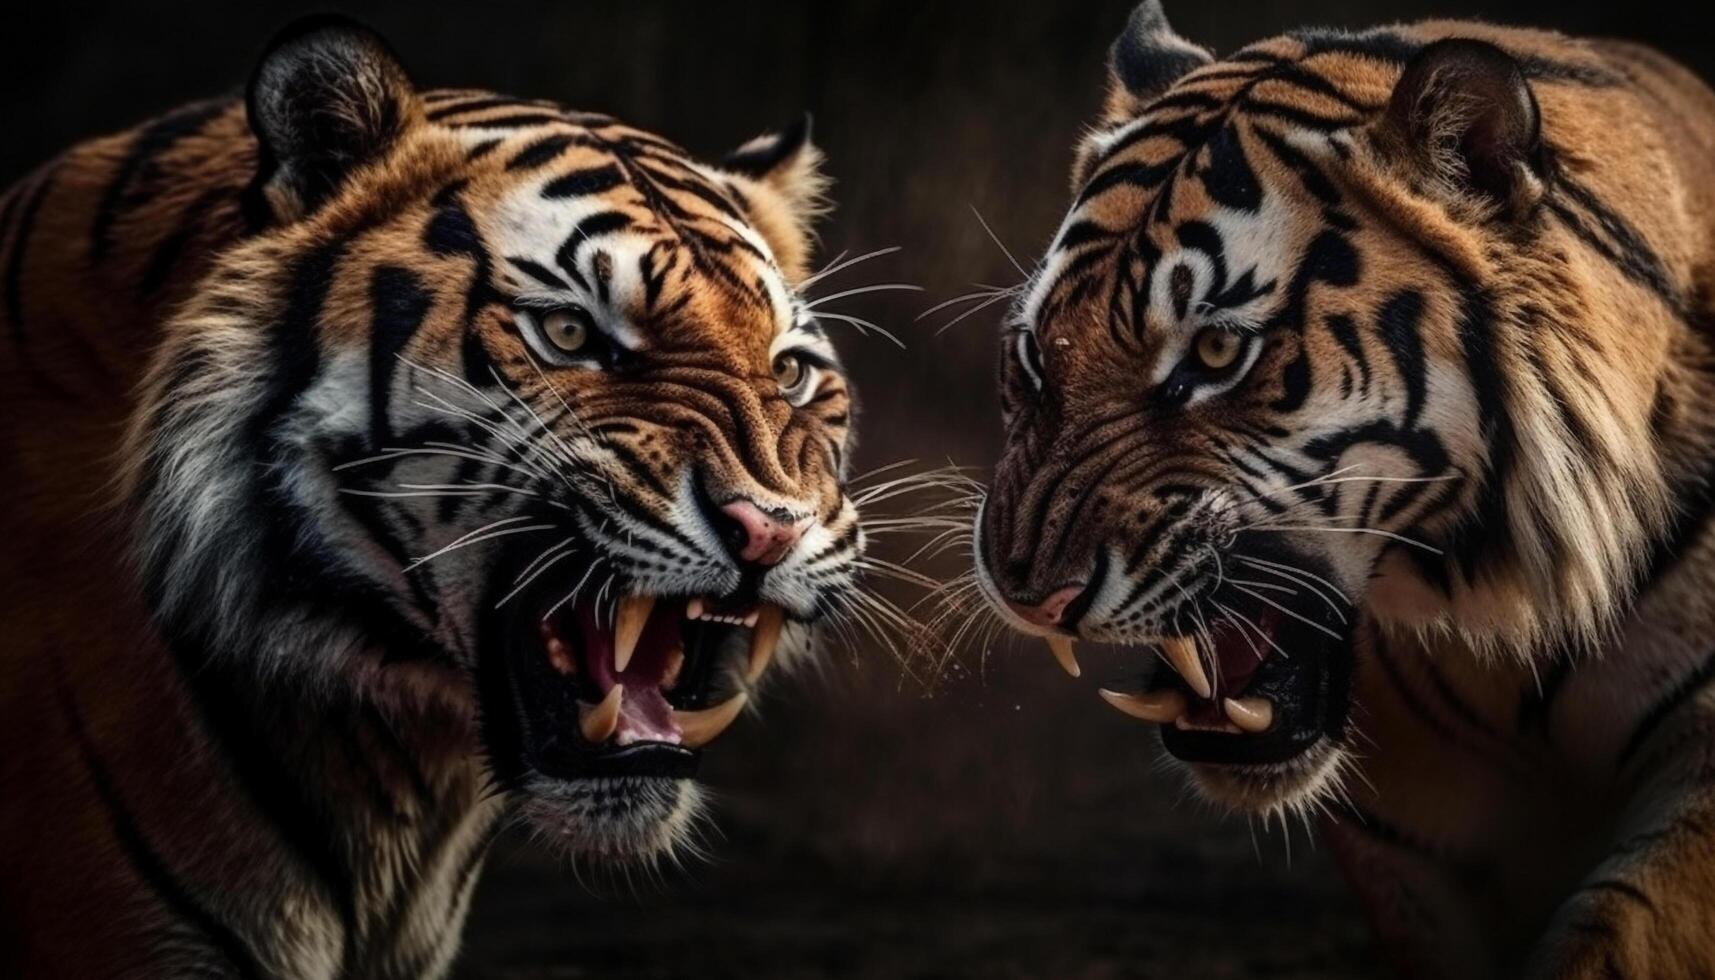 Bengal tiger staring with fury, aggression in its majestic portrait generated by AI photo